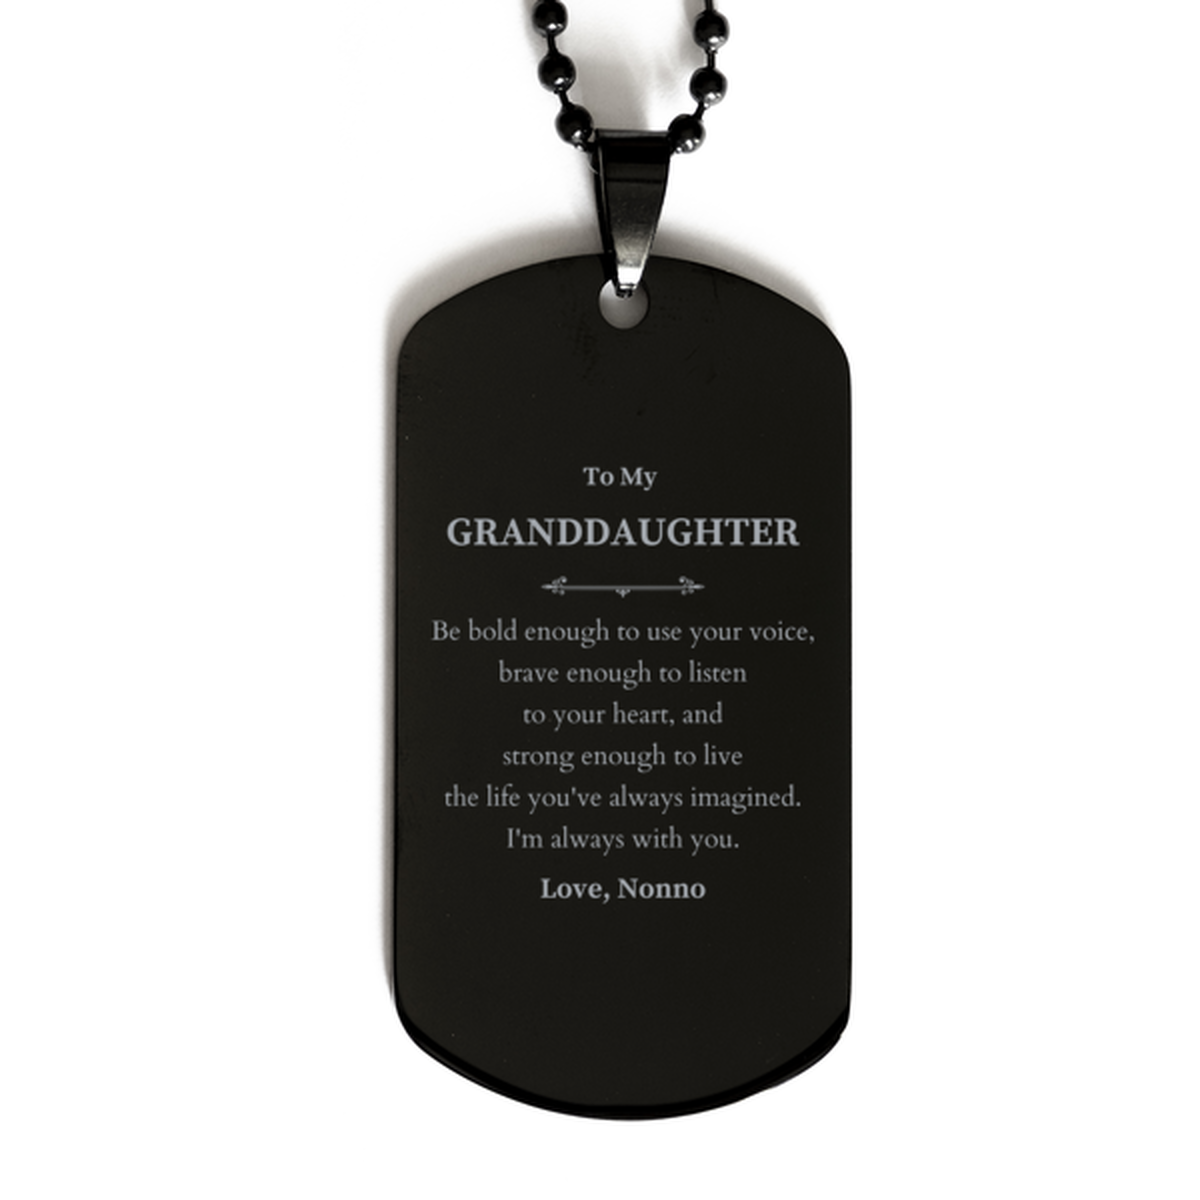 Keepsake Granddaughter Black Dog Tag Gift Idea Graduation Christmas Birthday Granddaughter from Nonno, Granddaughter Be bold enough to use your voice, brave enough to listen to your heart. Love, Nonno